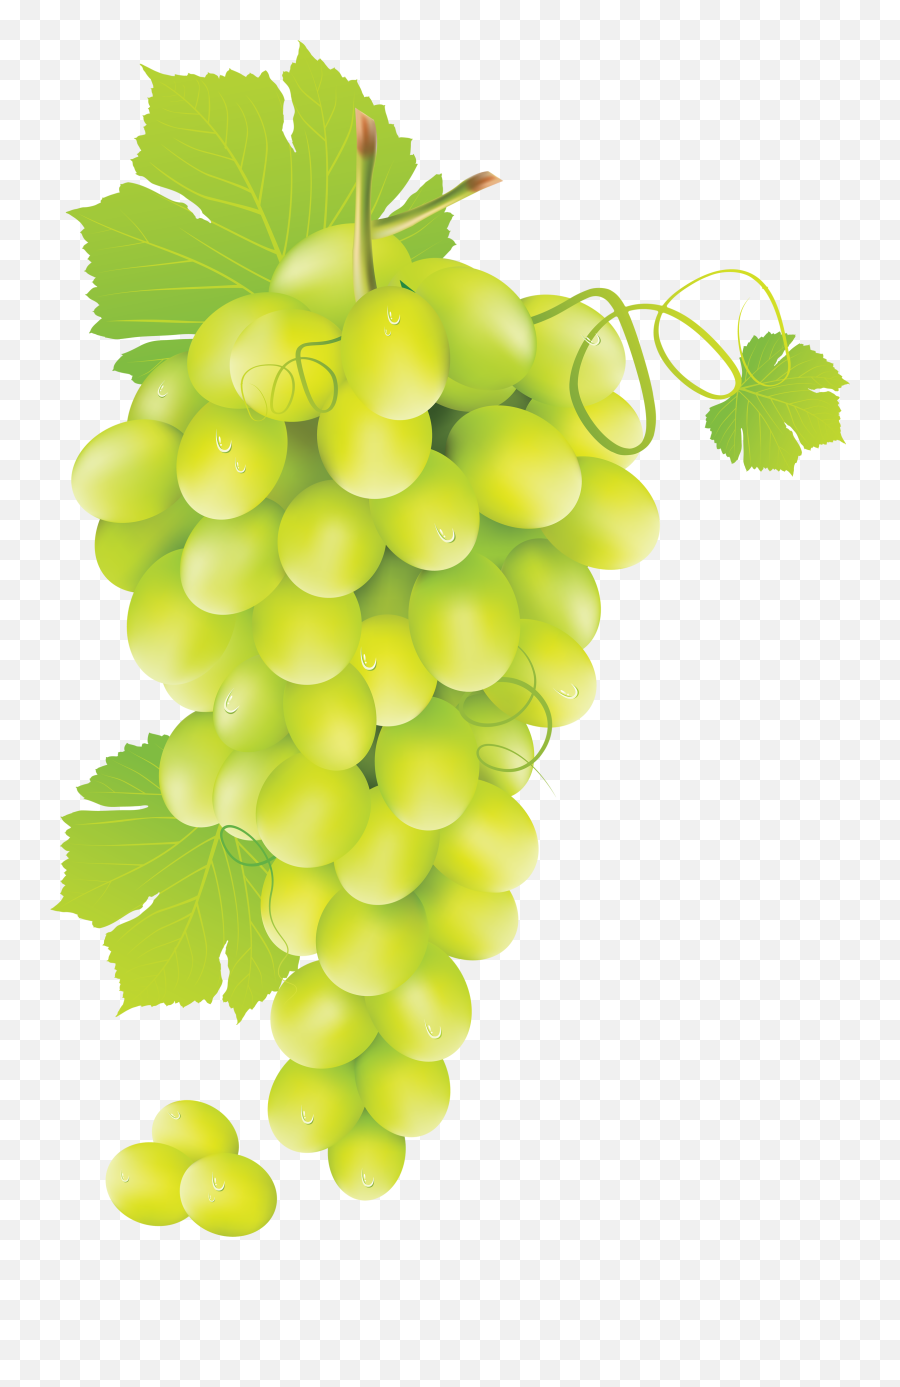 Green Grapes Png Image For Free Download - Green Grapes Png,Grapes Png